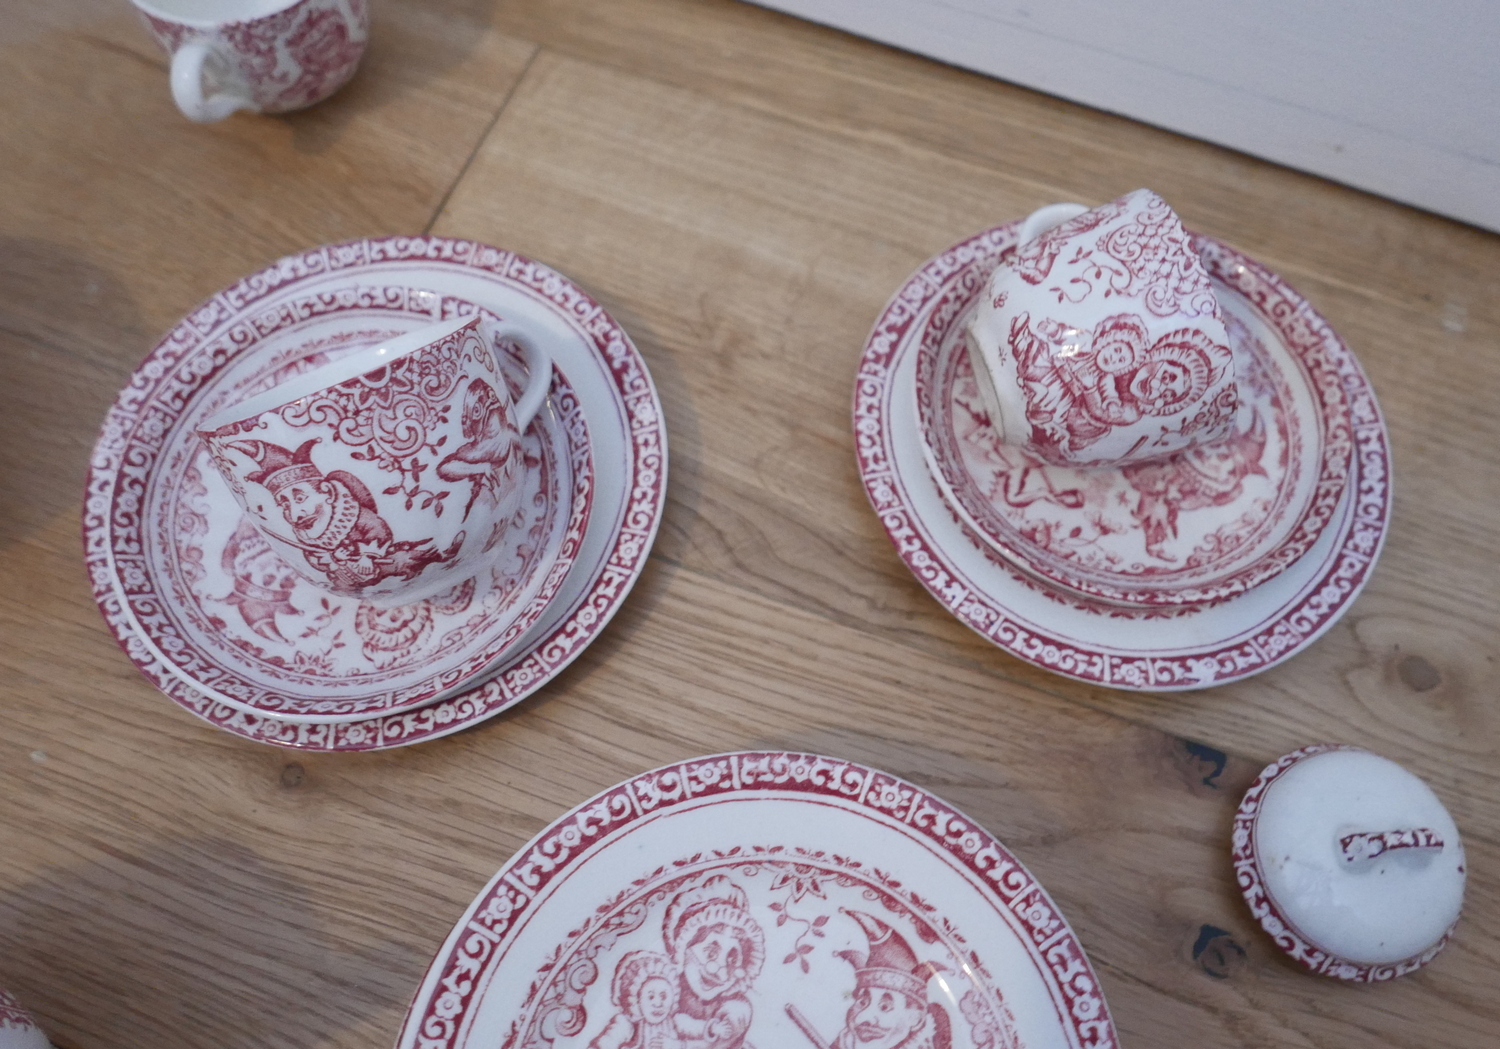 Antique Allertons Punch and Judy Childs Crockery Set -Plates-Saucers-Cups-Jug-Lidded Pot etc. - Image 6 of 8